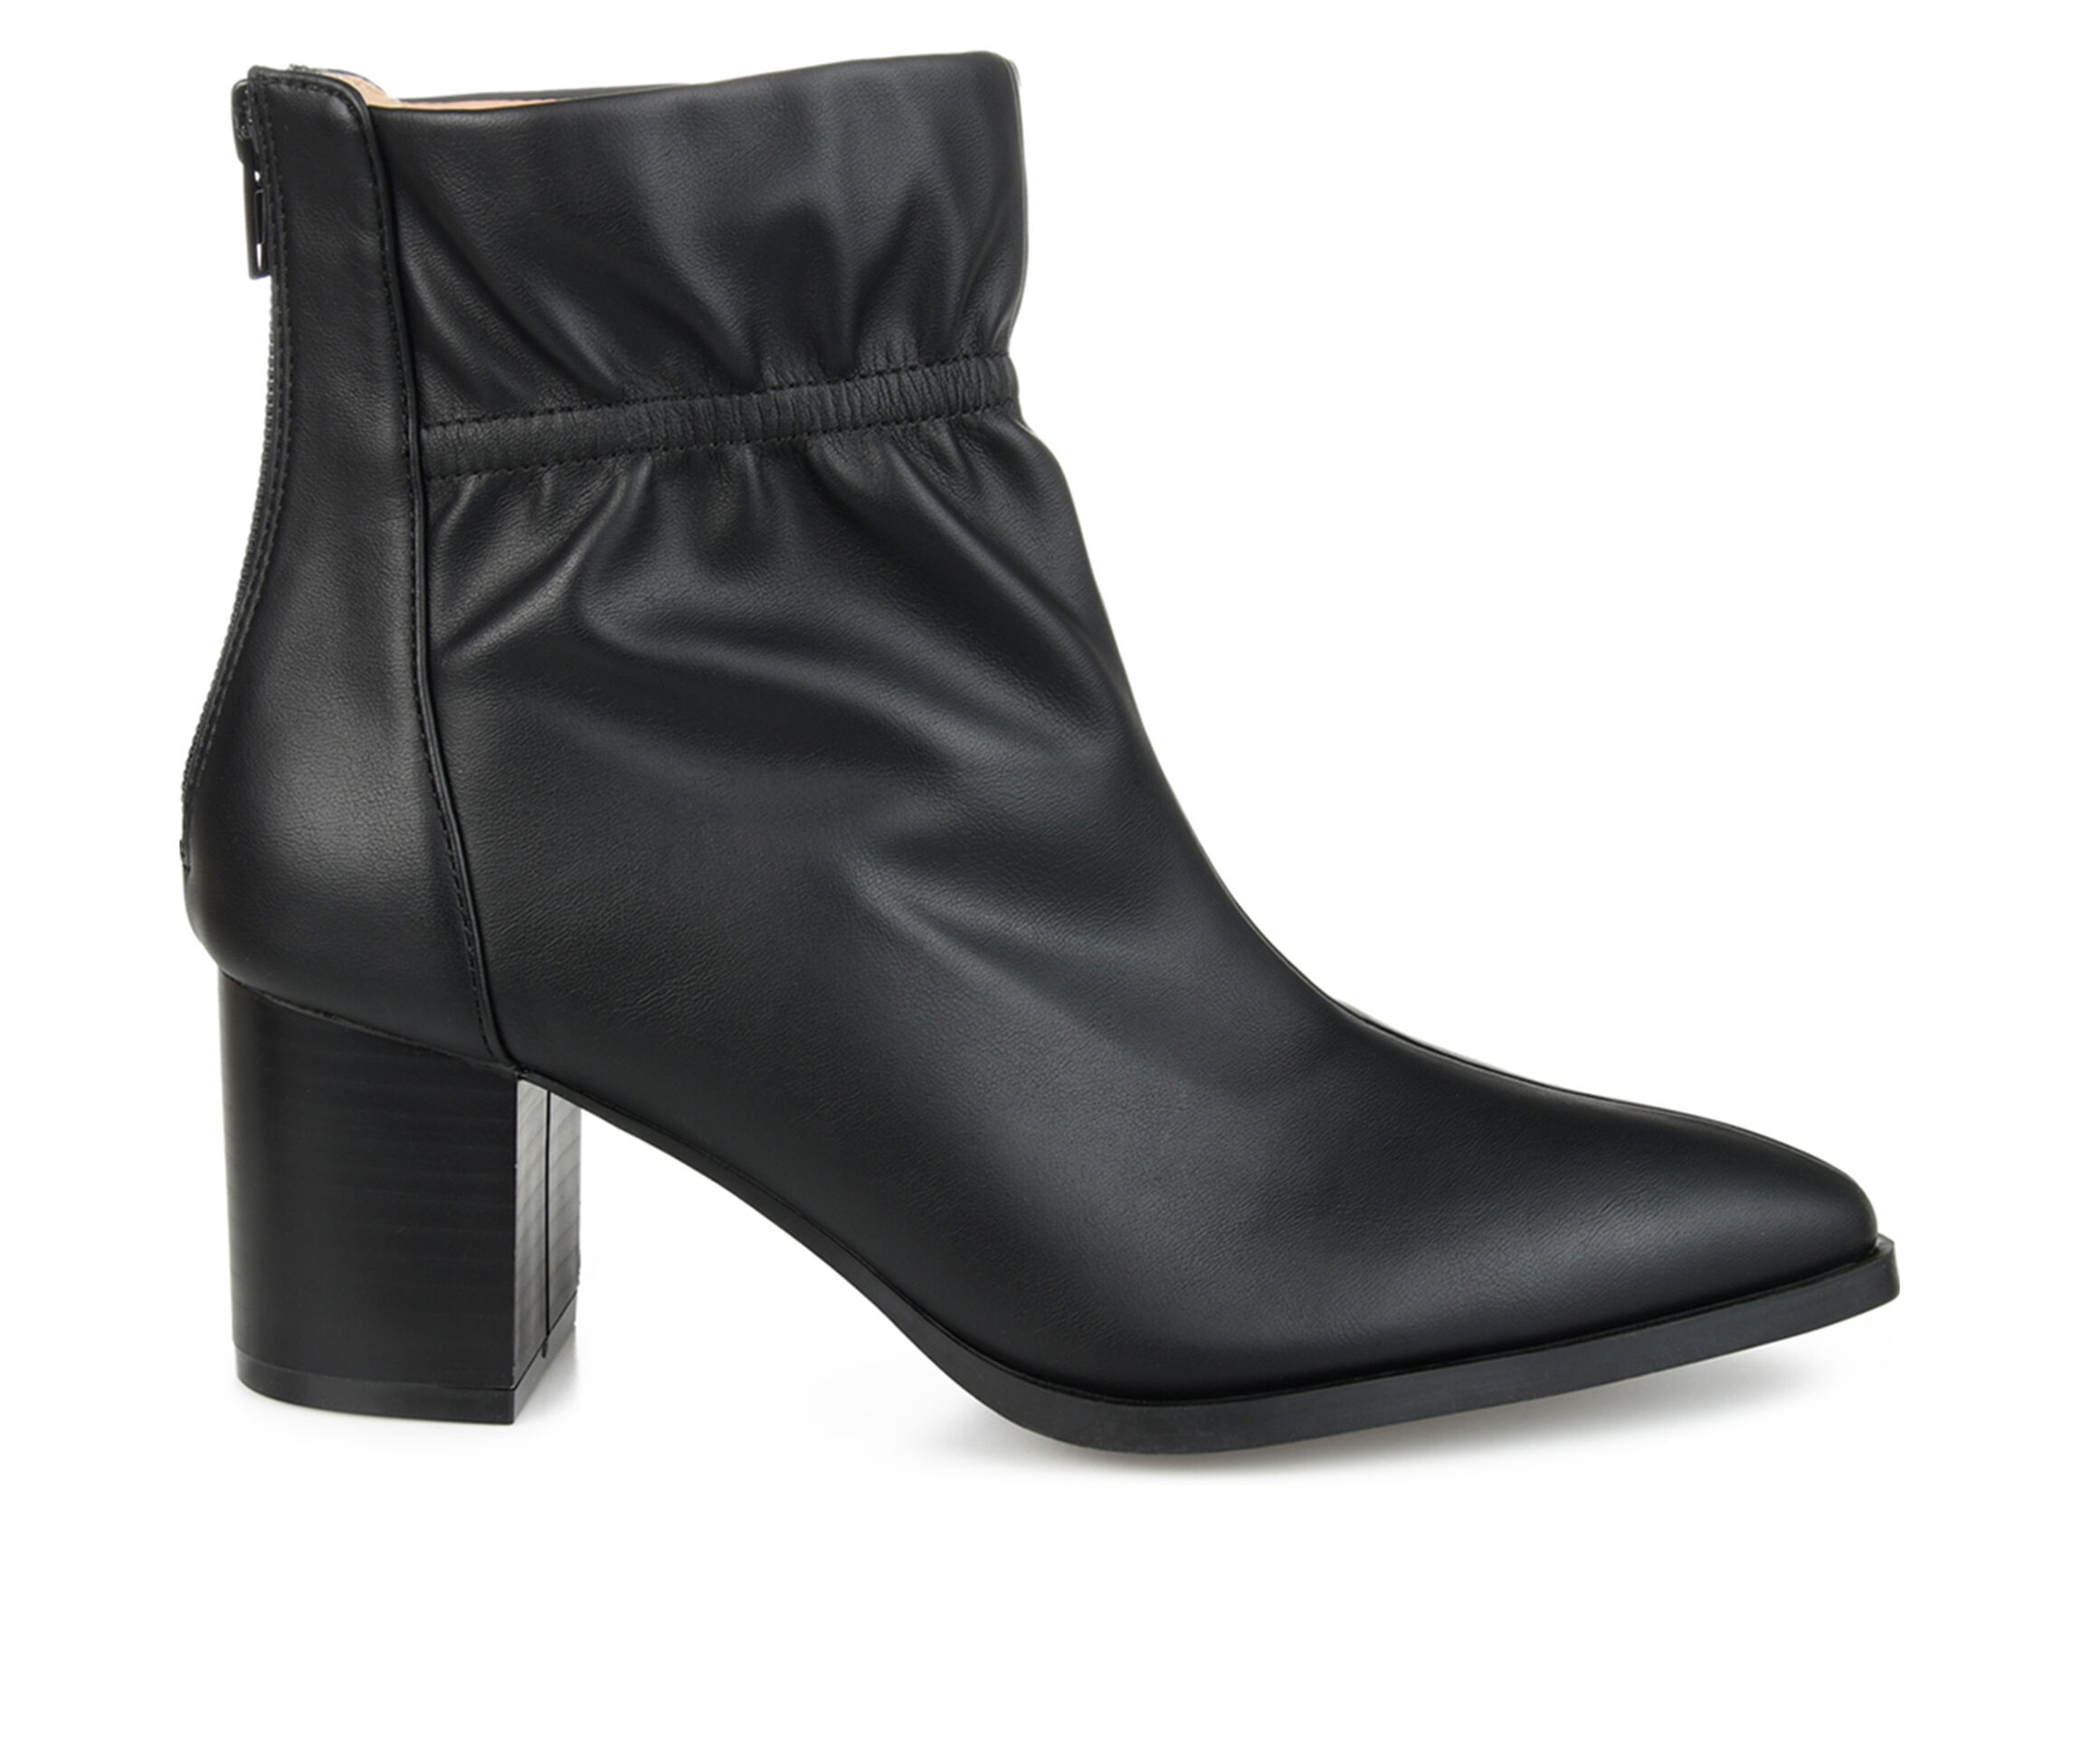 Women's Journee Collection Boots | Shoe Carnival